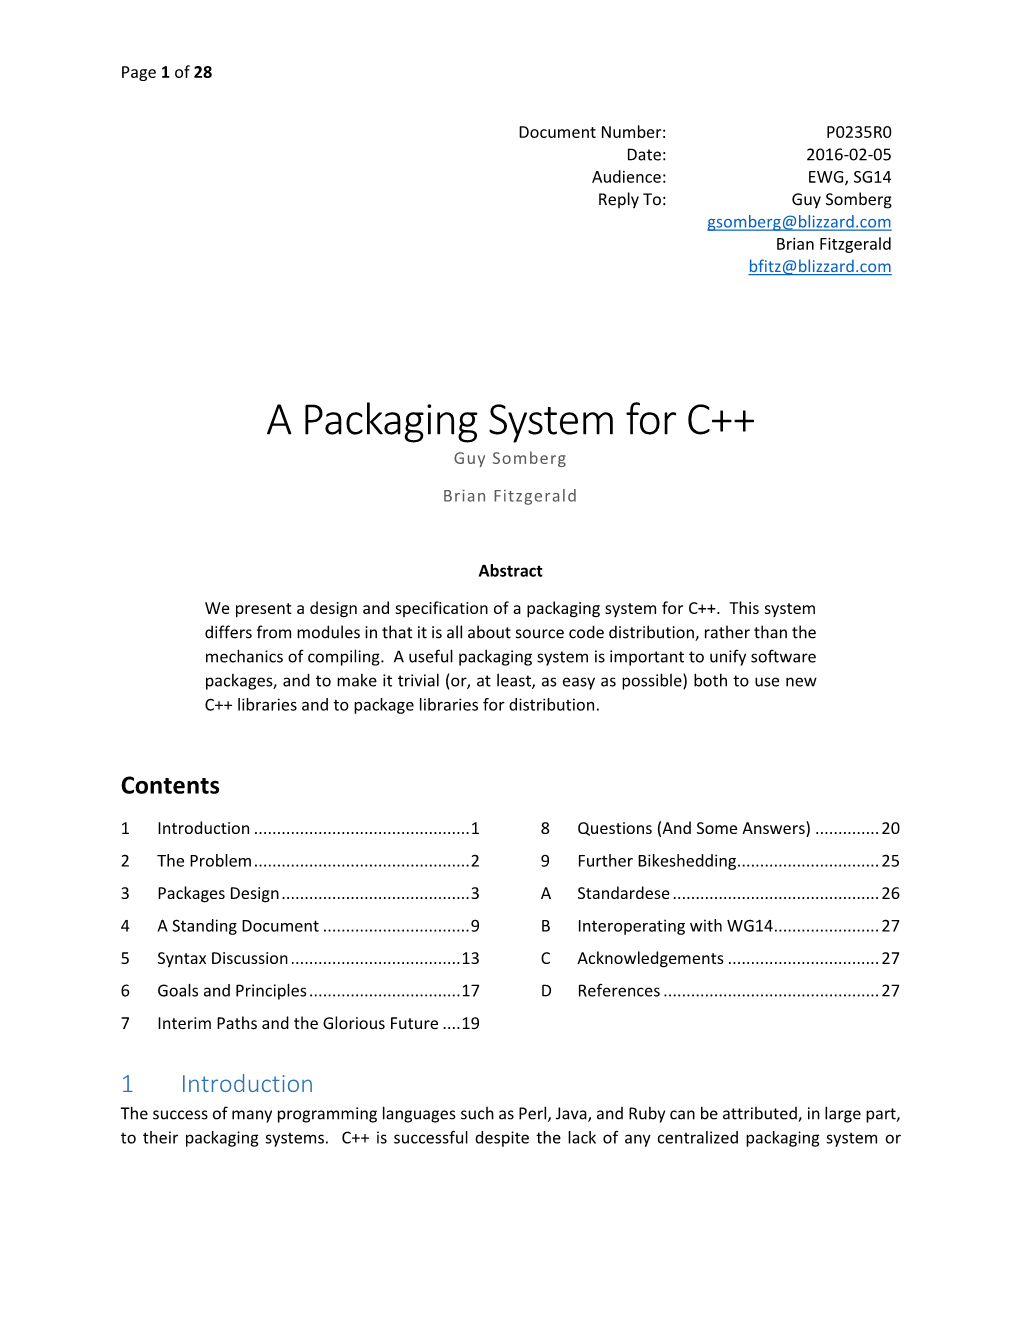 A Packaging System for C++ Guy Somberg